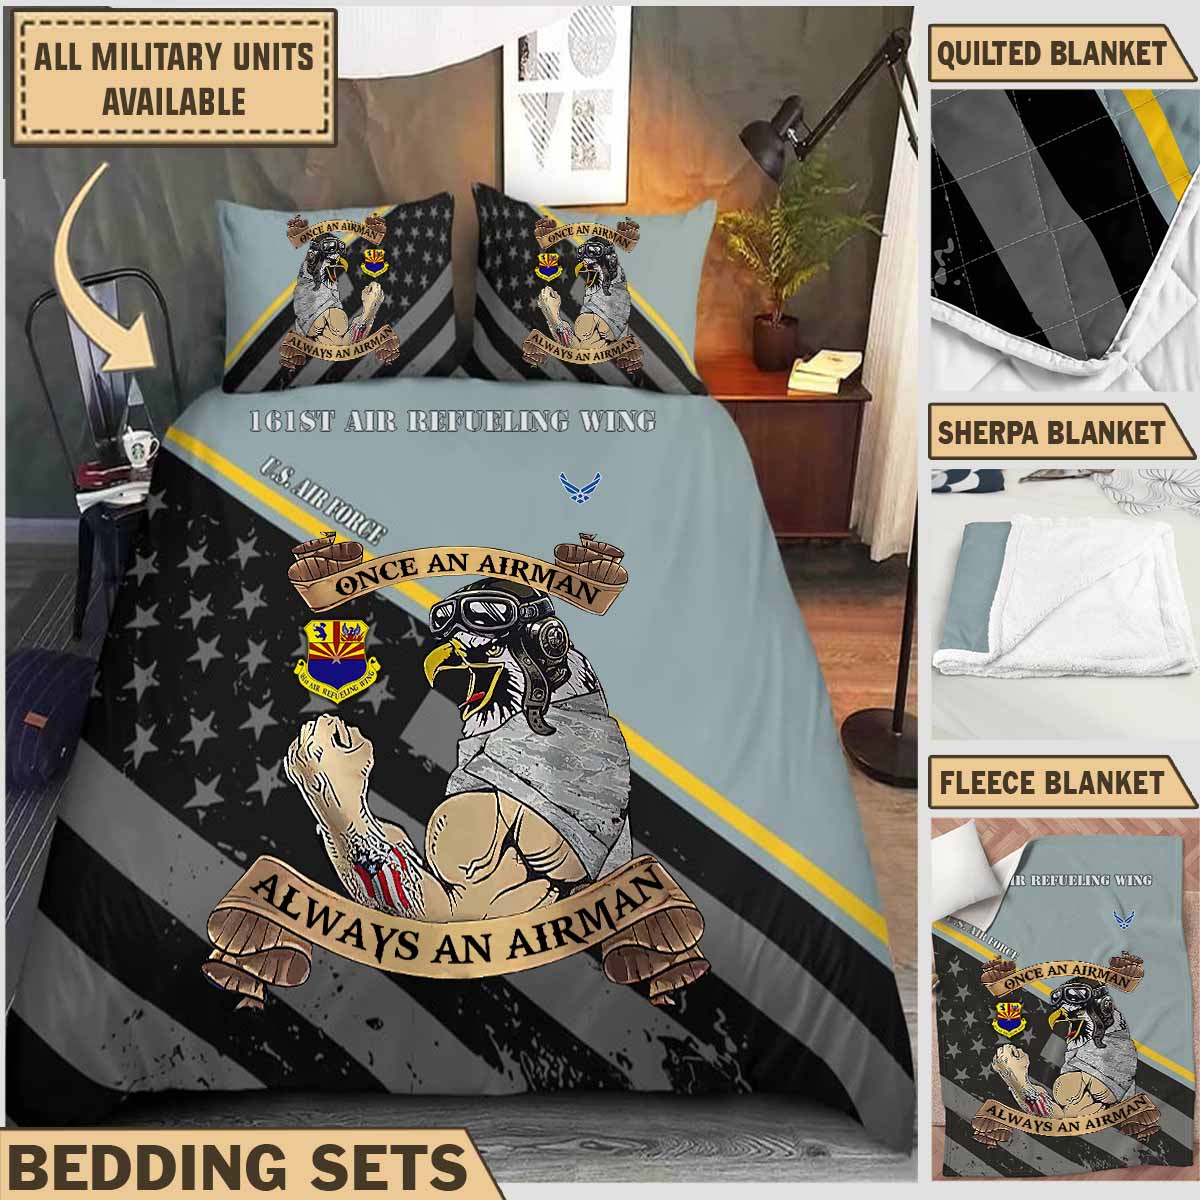 161st arw air refueling wingbedding collection 0bkfo